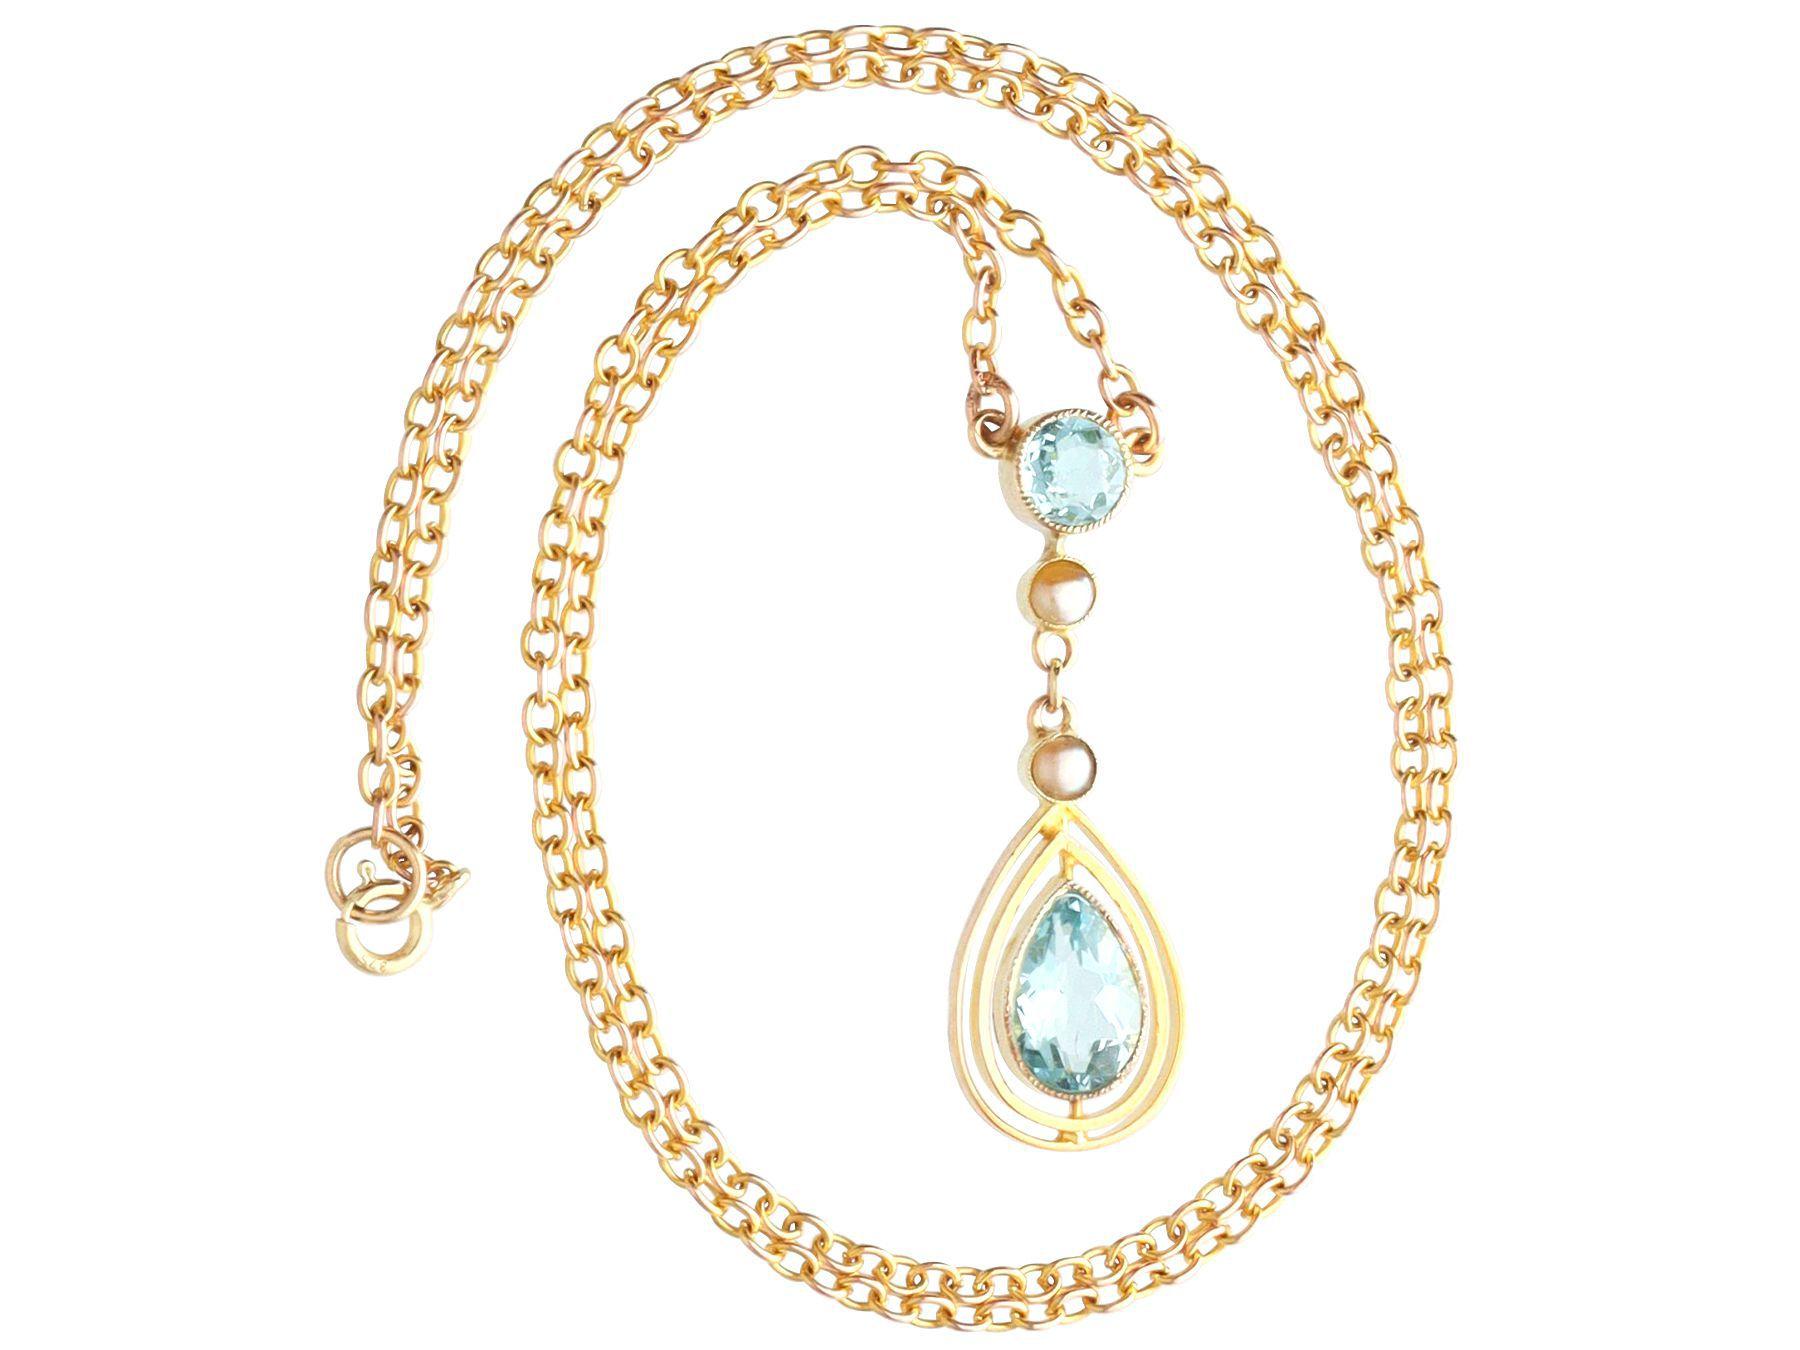 Pear Cut Antique 1.13 Carat Aquamarine and Seed Pearl Necklace in Yellow Gold